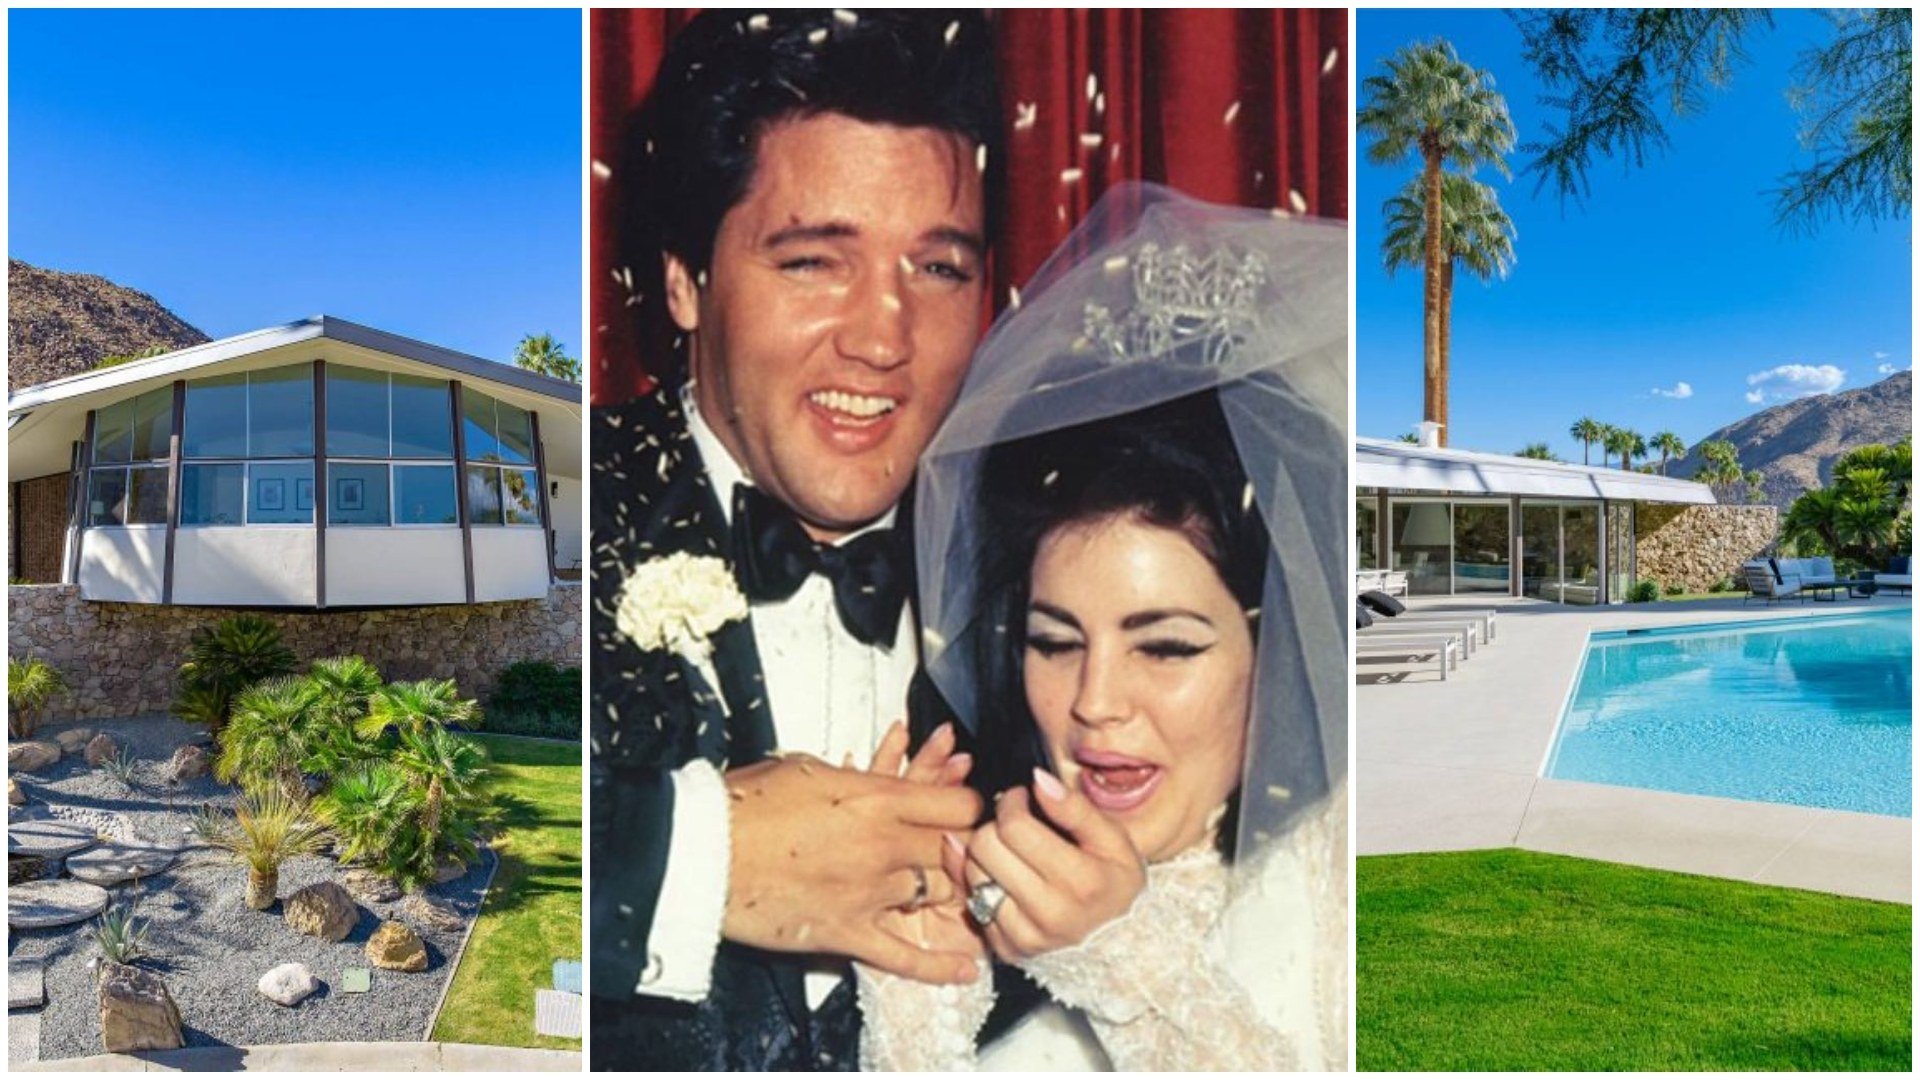 Elvis Presley, Priscilla Wagner and the Palm Springs home that was once featured in Look magazine as the “House of Tomorrow”. Photos: ChrisOne Point Media Group, @priscilla.presley_/Instagram